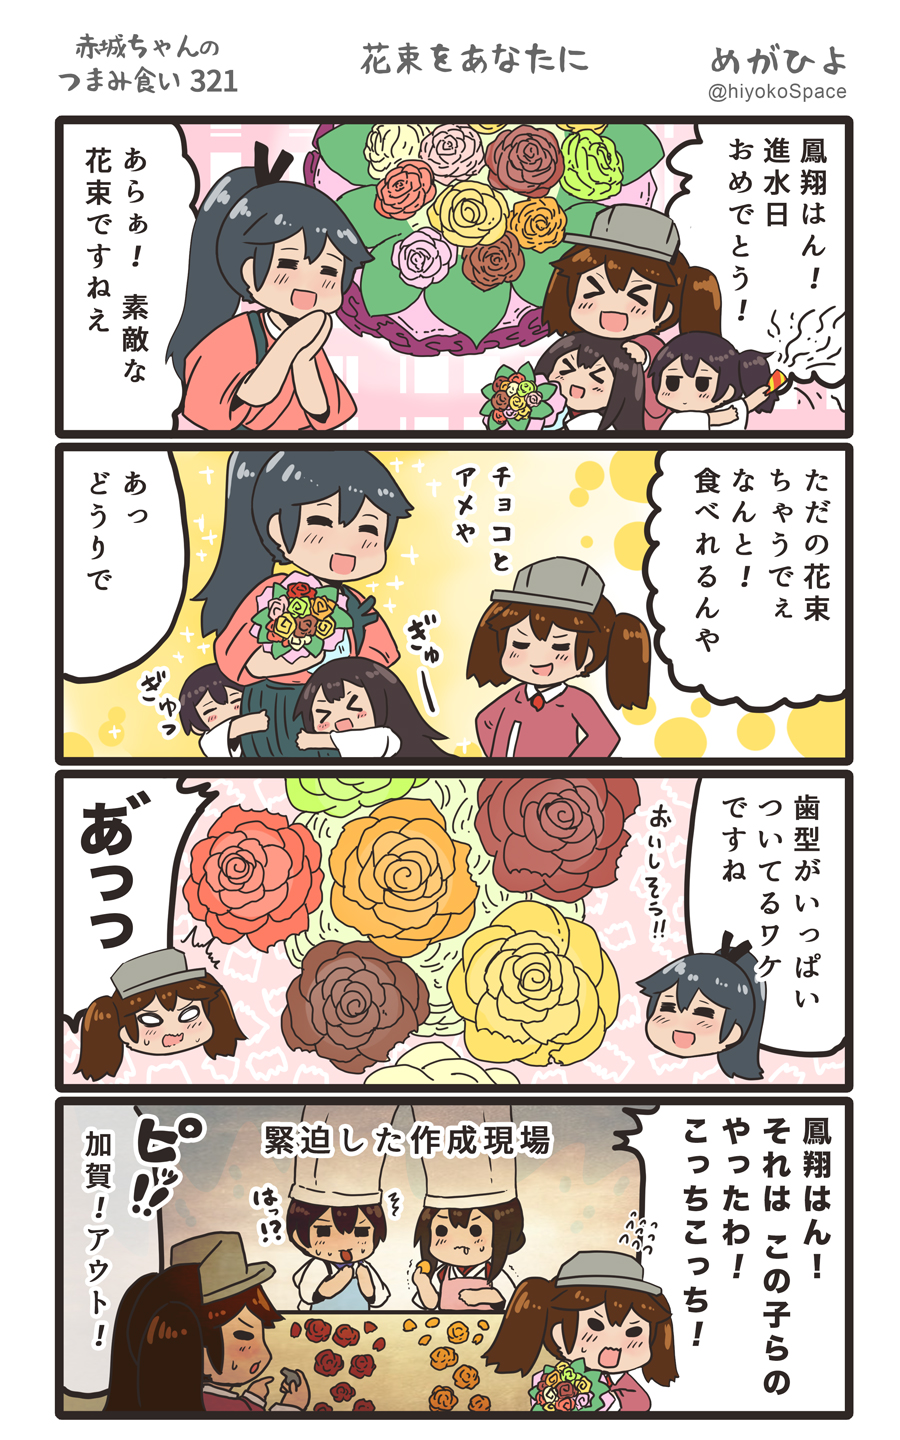 4girls 4koma akagi_(kantai_collection) comic commentary_request highres houshou_(kantai_collection) kaga_(kantai_collection) kantai_collection megahiyo multiple_girls ryuujou_(kantai_collection) speech_bubble translation_request twitter_username